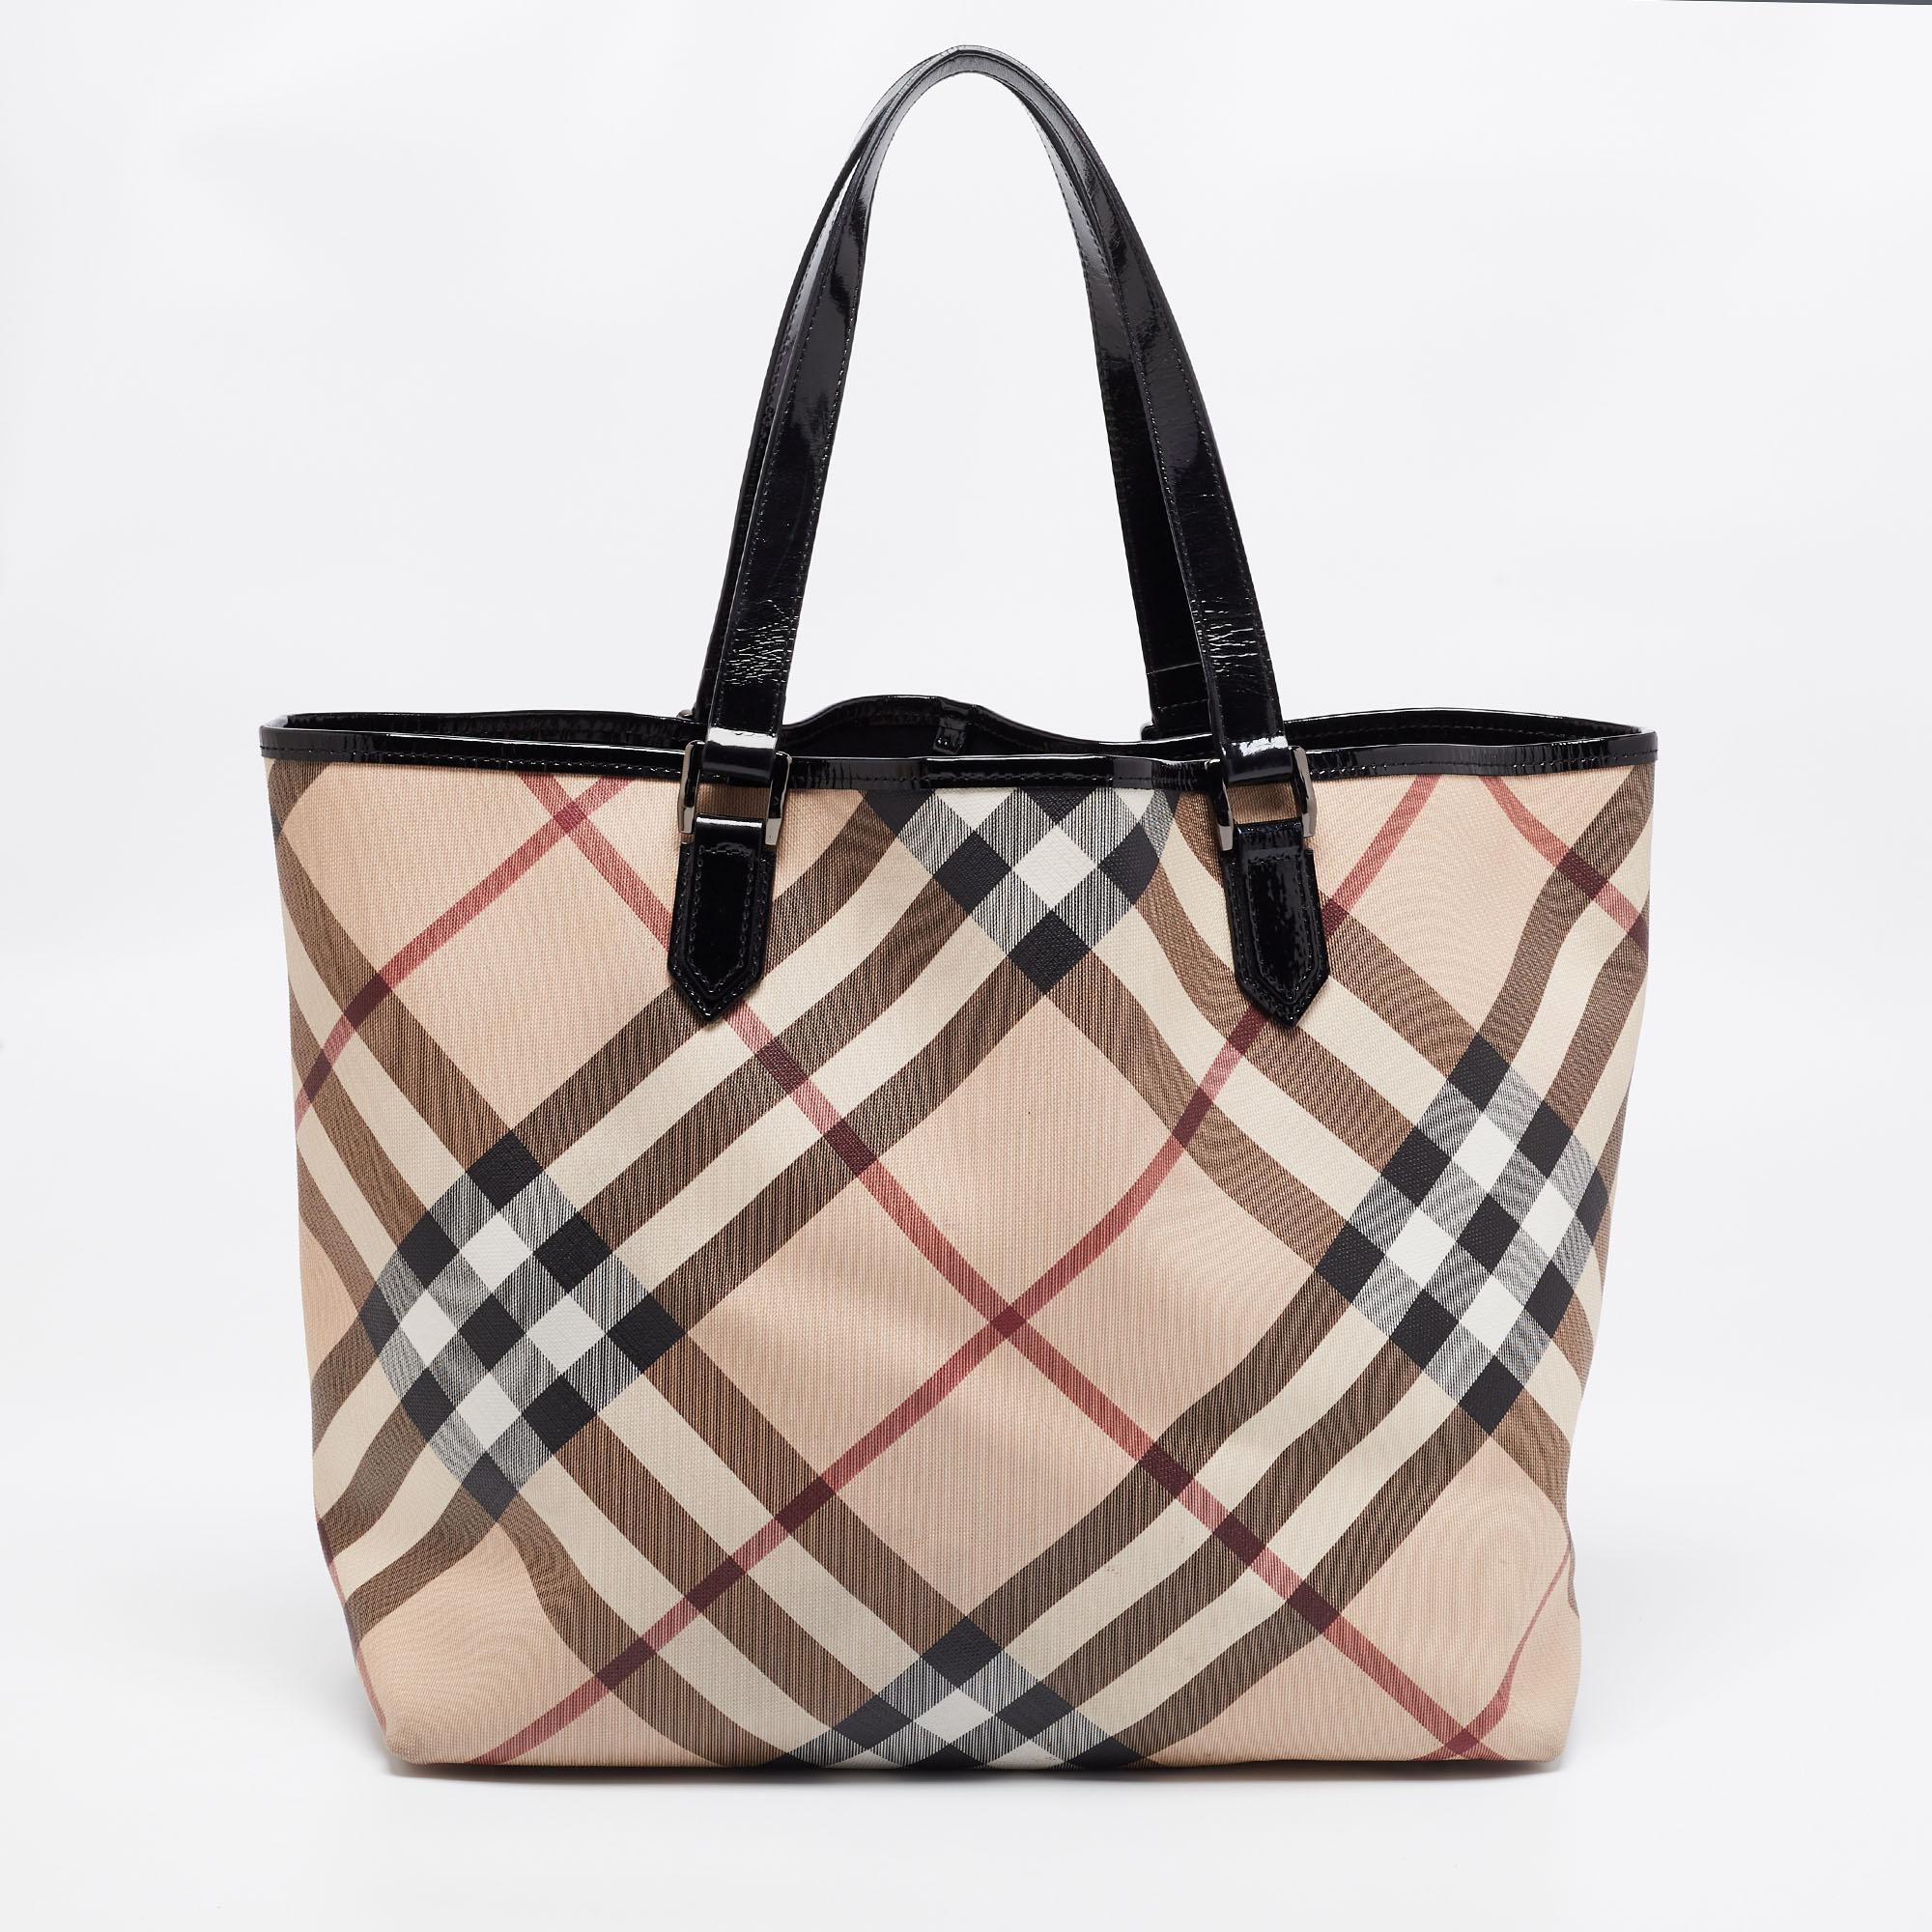 Burberry's Nickie tote is chic and smart. Crafted from PVC and styled with patent leather trims, it features two handles and protective metal feet at the bottom. It opens to a fabric-lined interior that has enough space for all your daily